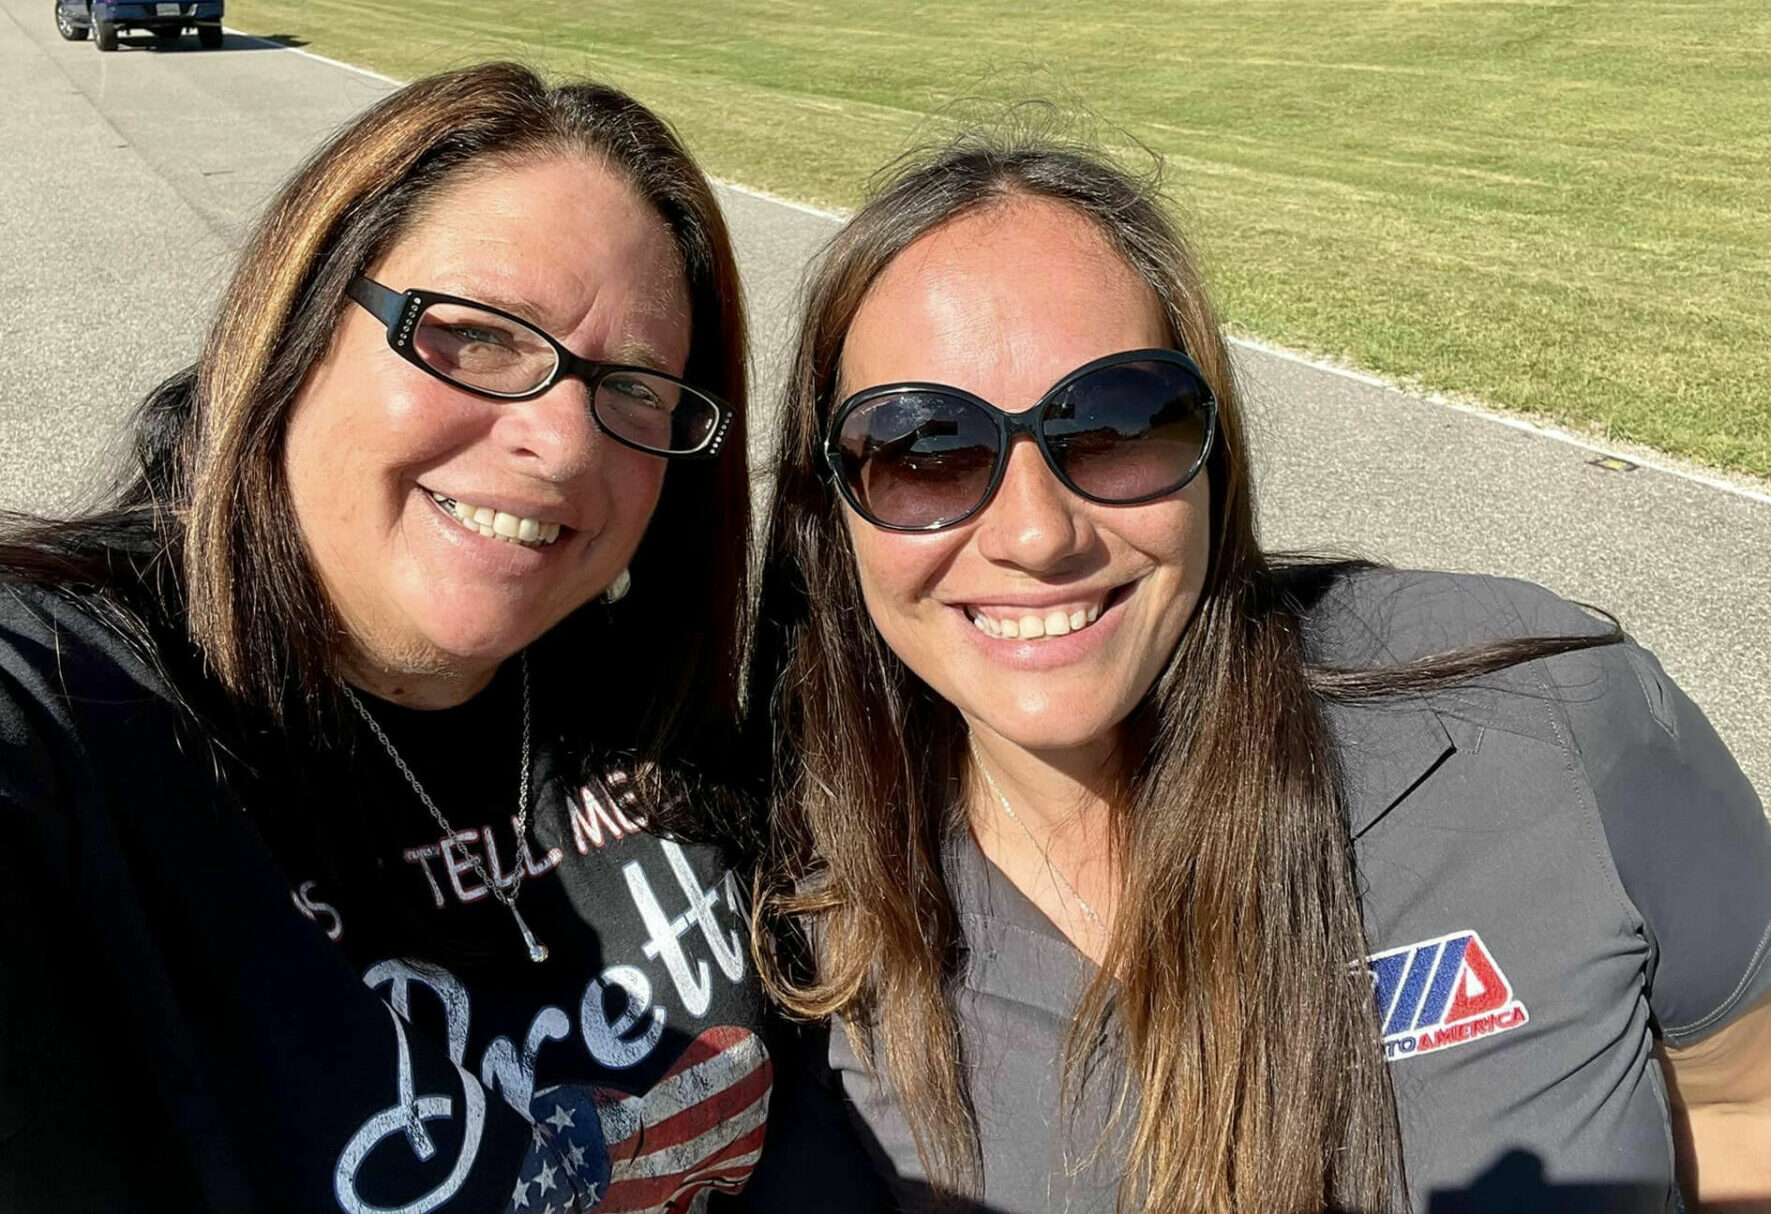 MotoAmerica Director of Operations Niccole Cox (right) with Diane Shepard Tribou (left), a long-time race official who works with many different organizations. Photo courtesy Diane Shepard Tribou.